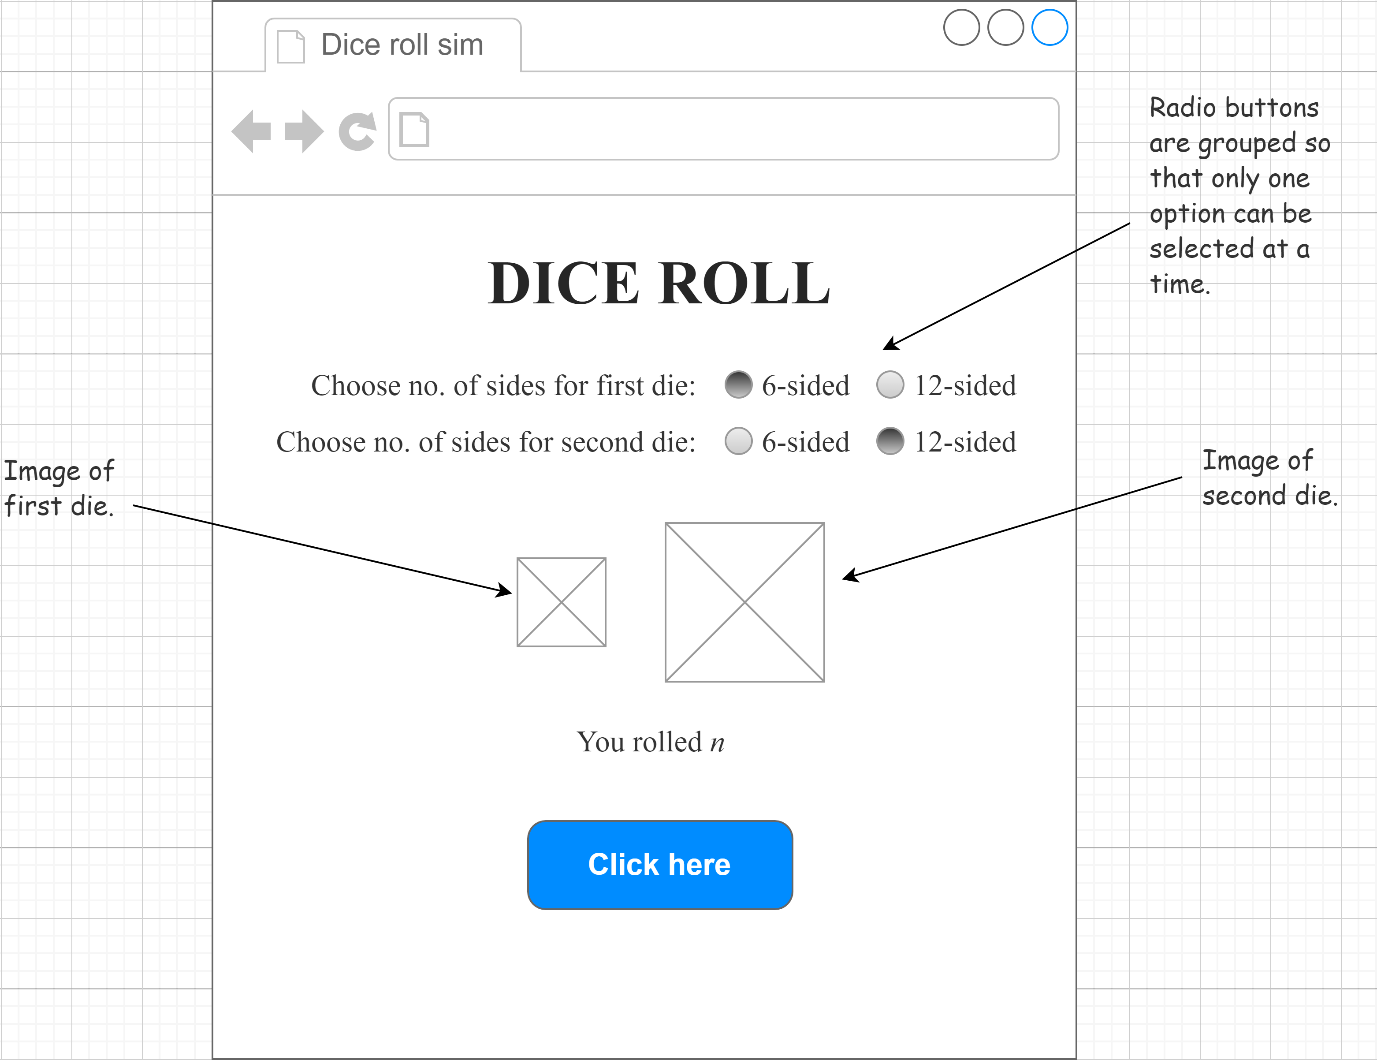 Screenshot of amock-up dice simulation. Users select number of sides for the first die: six or twelve. Users select the number of sides for the second die: six or twelve. This uses radio buttons so that only one option can be selected at a time. An image of each die appears underneath. Users select the button 'Click here' and the simulator tells the users they rolled n amount of times.